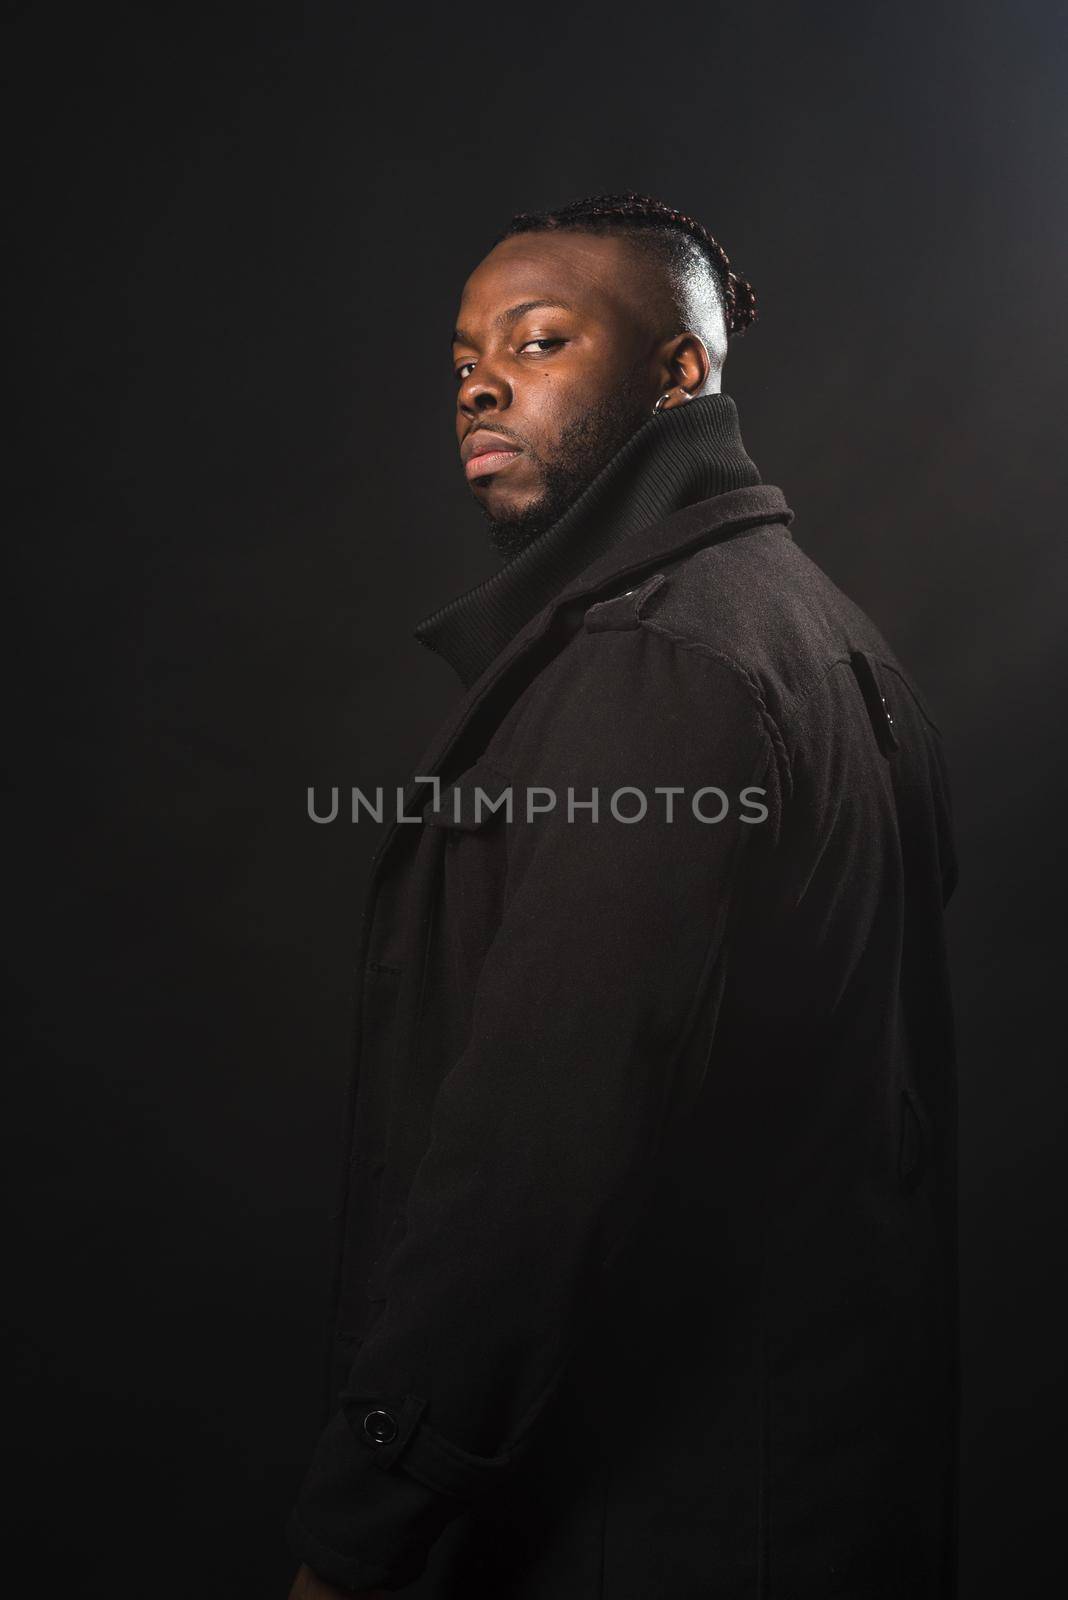 Black man with his back turned to the camera with a serious look. Mid shot. Black background